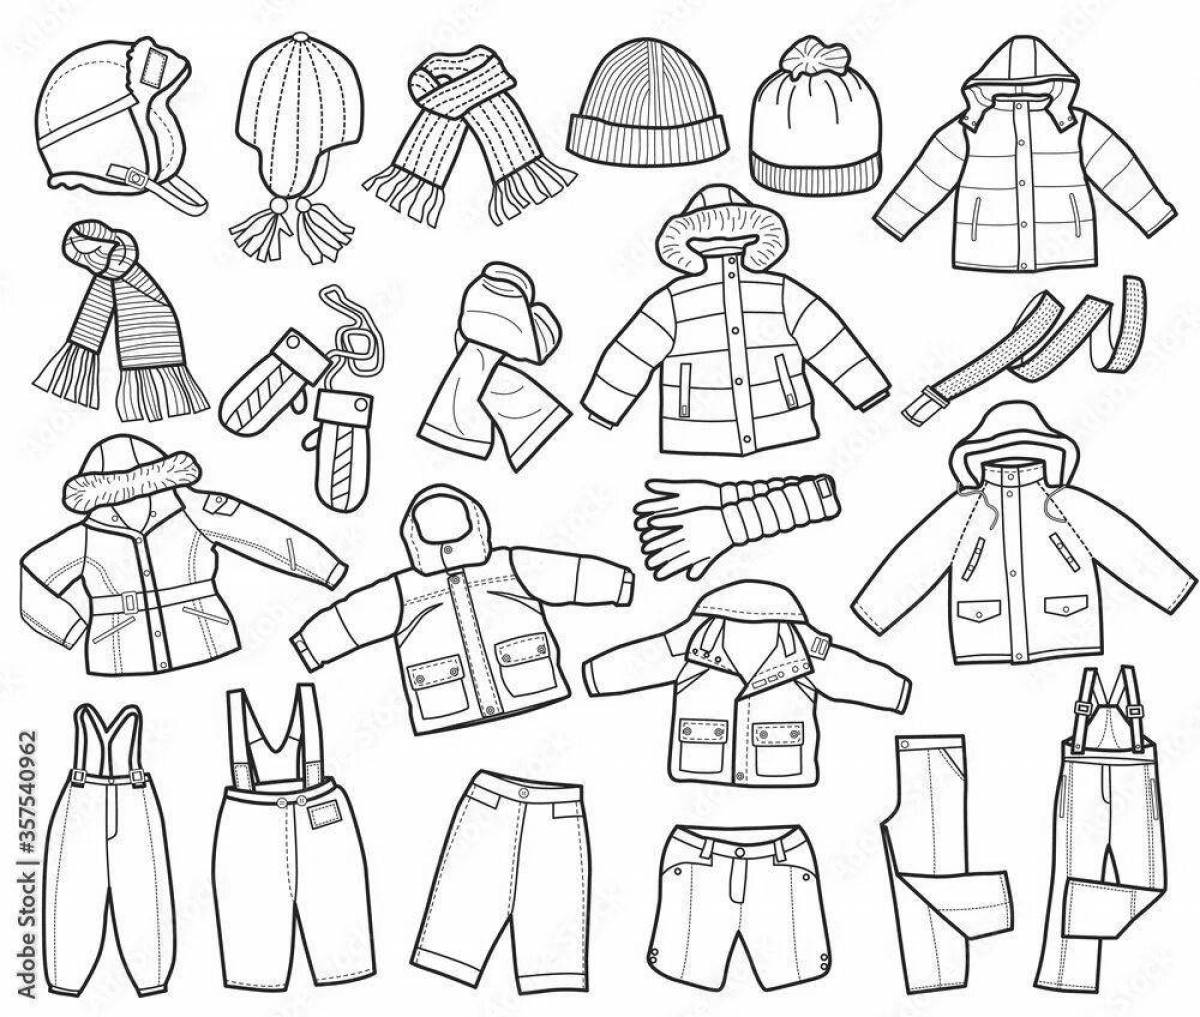 Playful winter clothes coloring page for 3-4 year olds